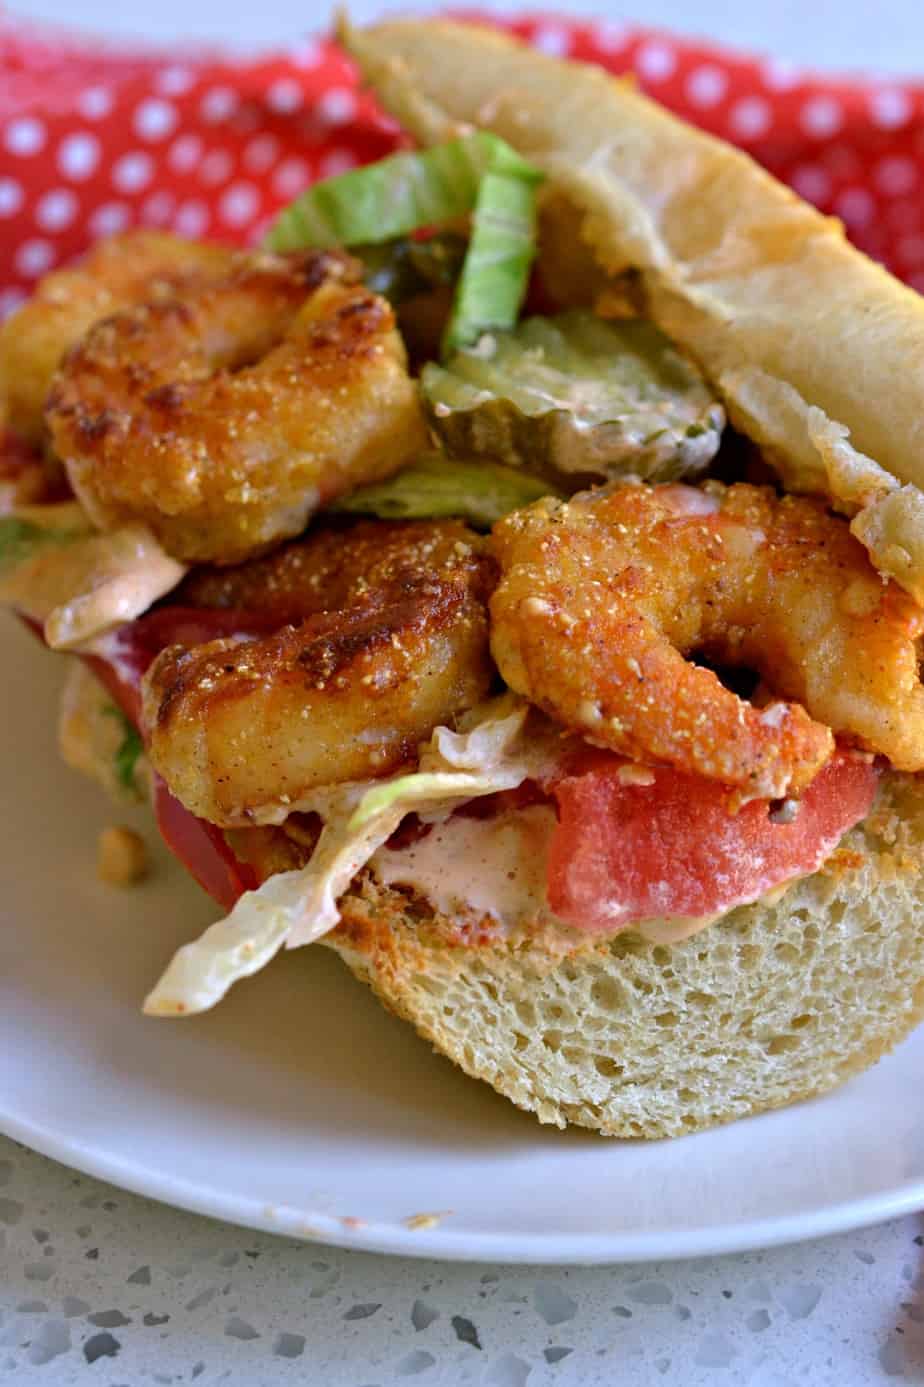 These Shrimp Po Boy sandwiches are filled with crispy fried shrimp and topped with an amazing sassy Remoulade Sauce.